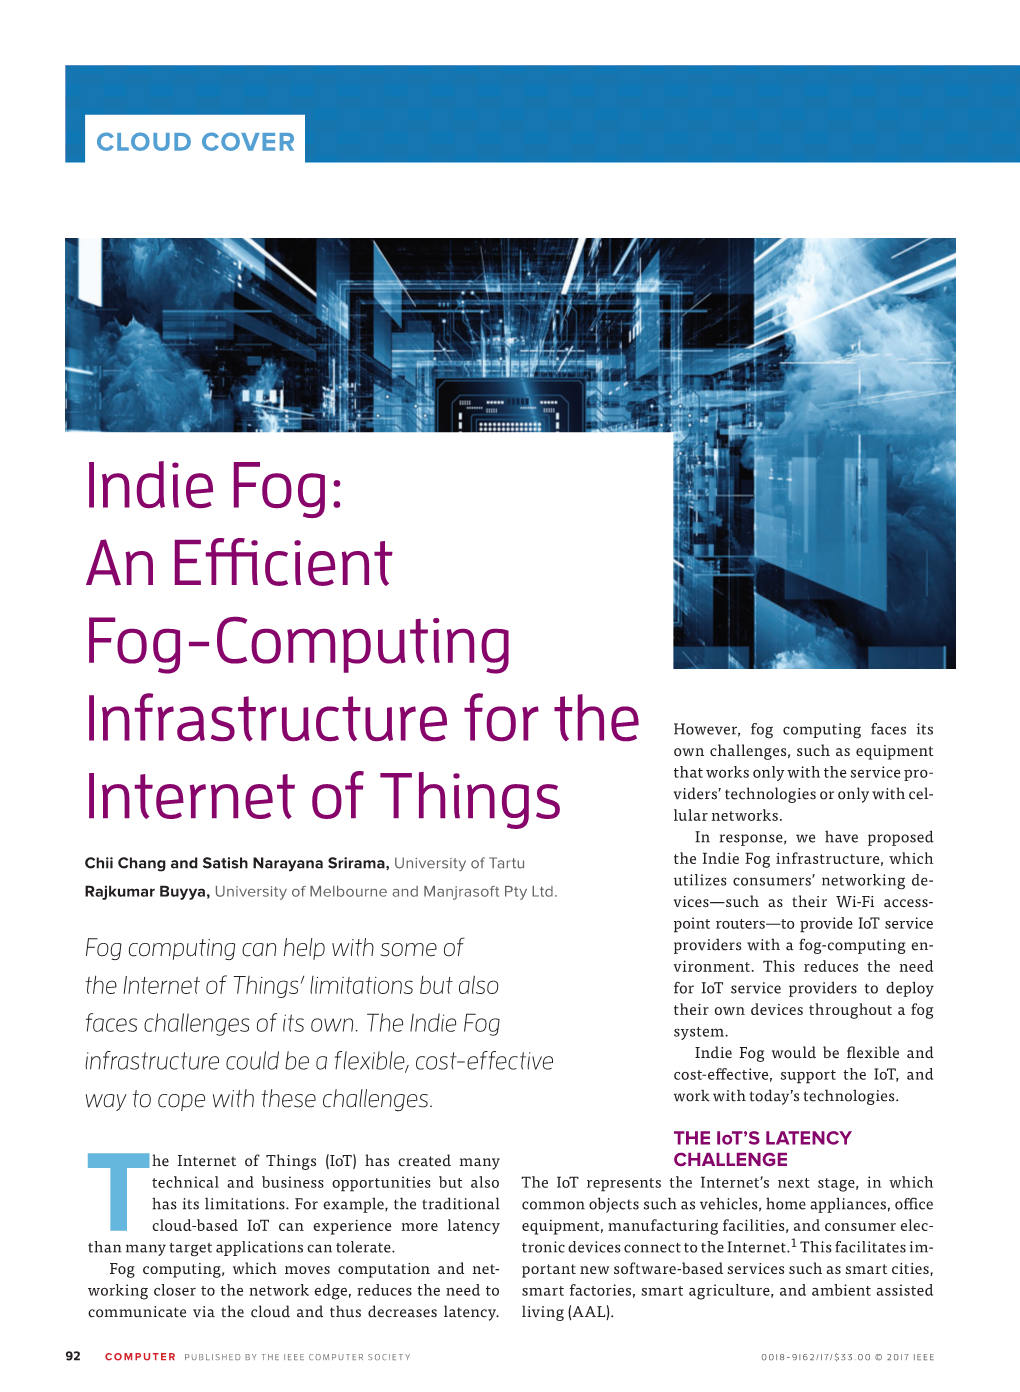 Indie Fog: an Efficient Fog-Computing Infrastructure for the Internet of Things